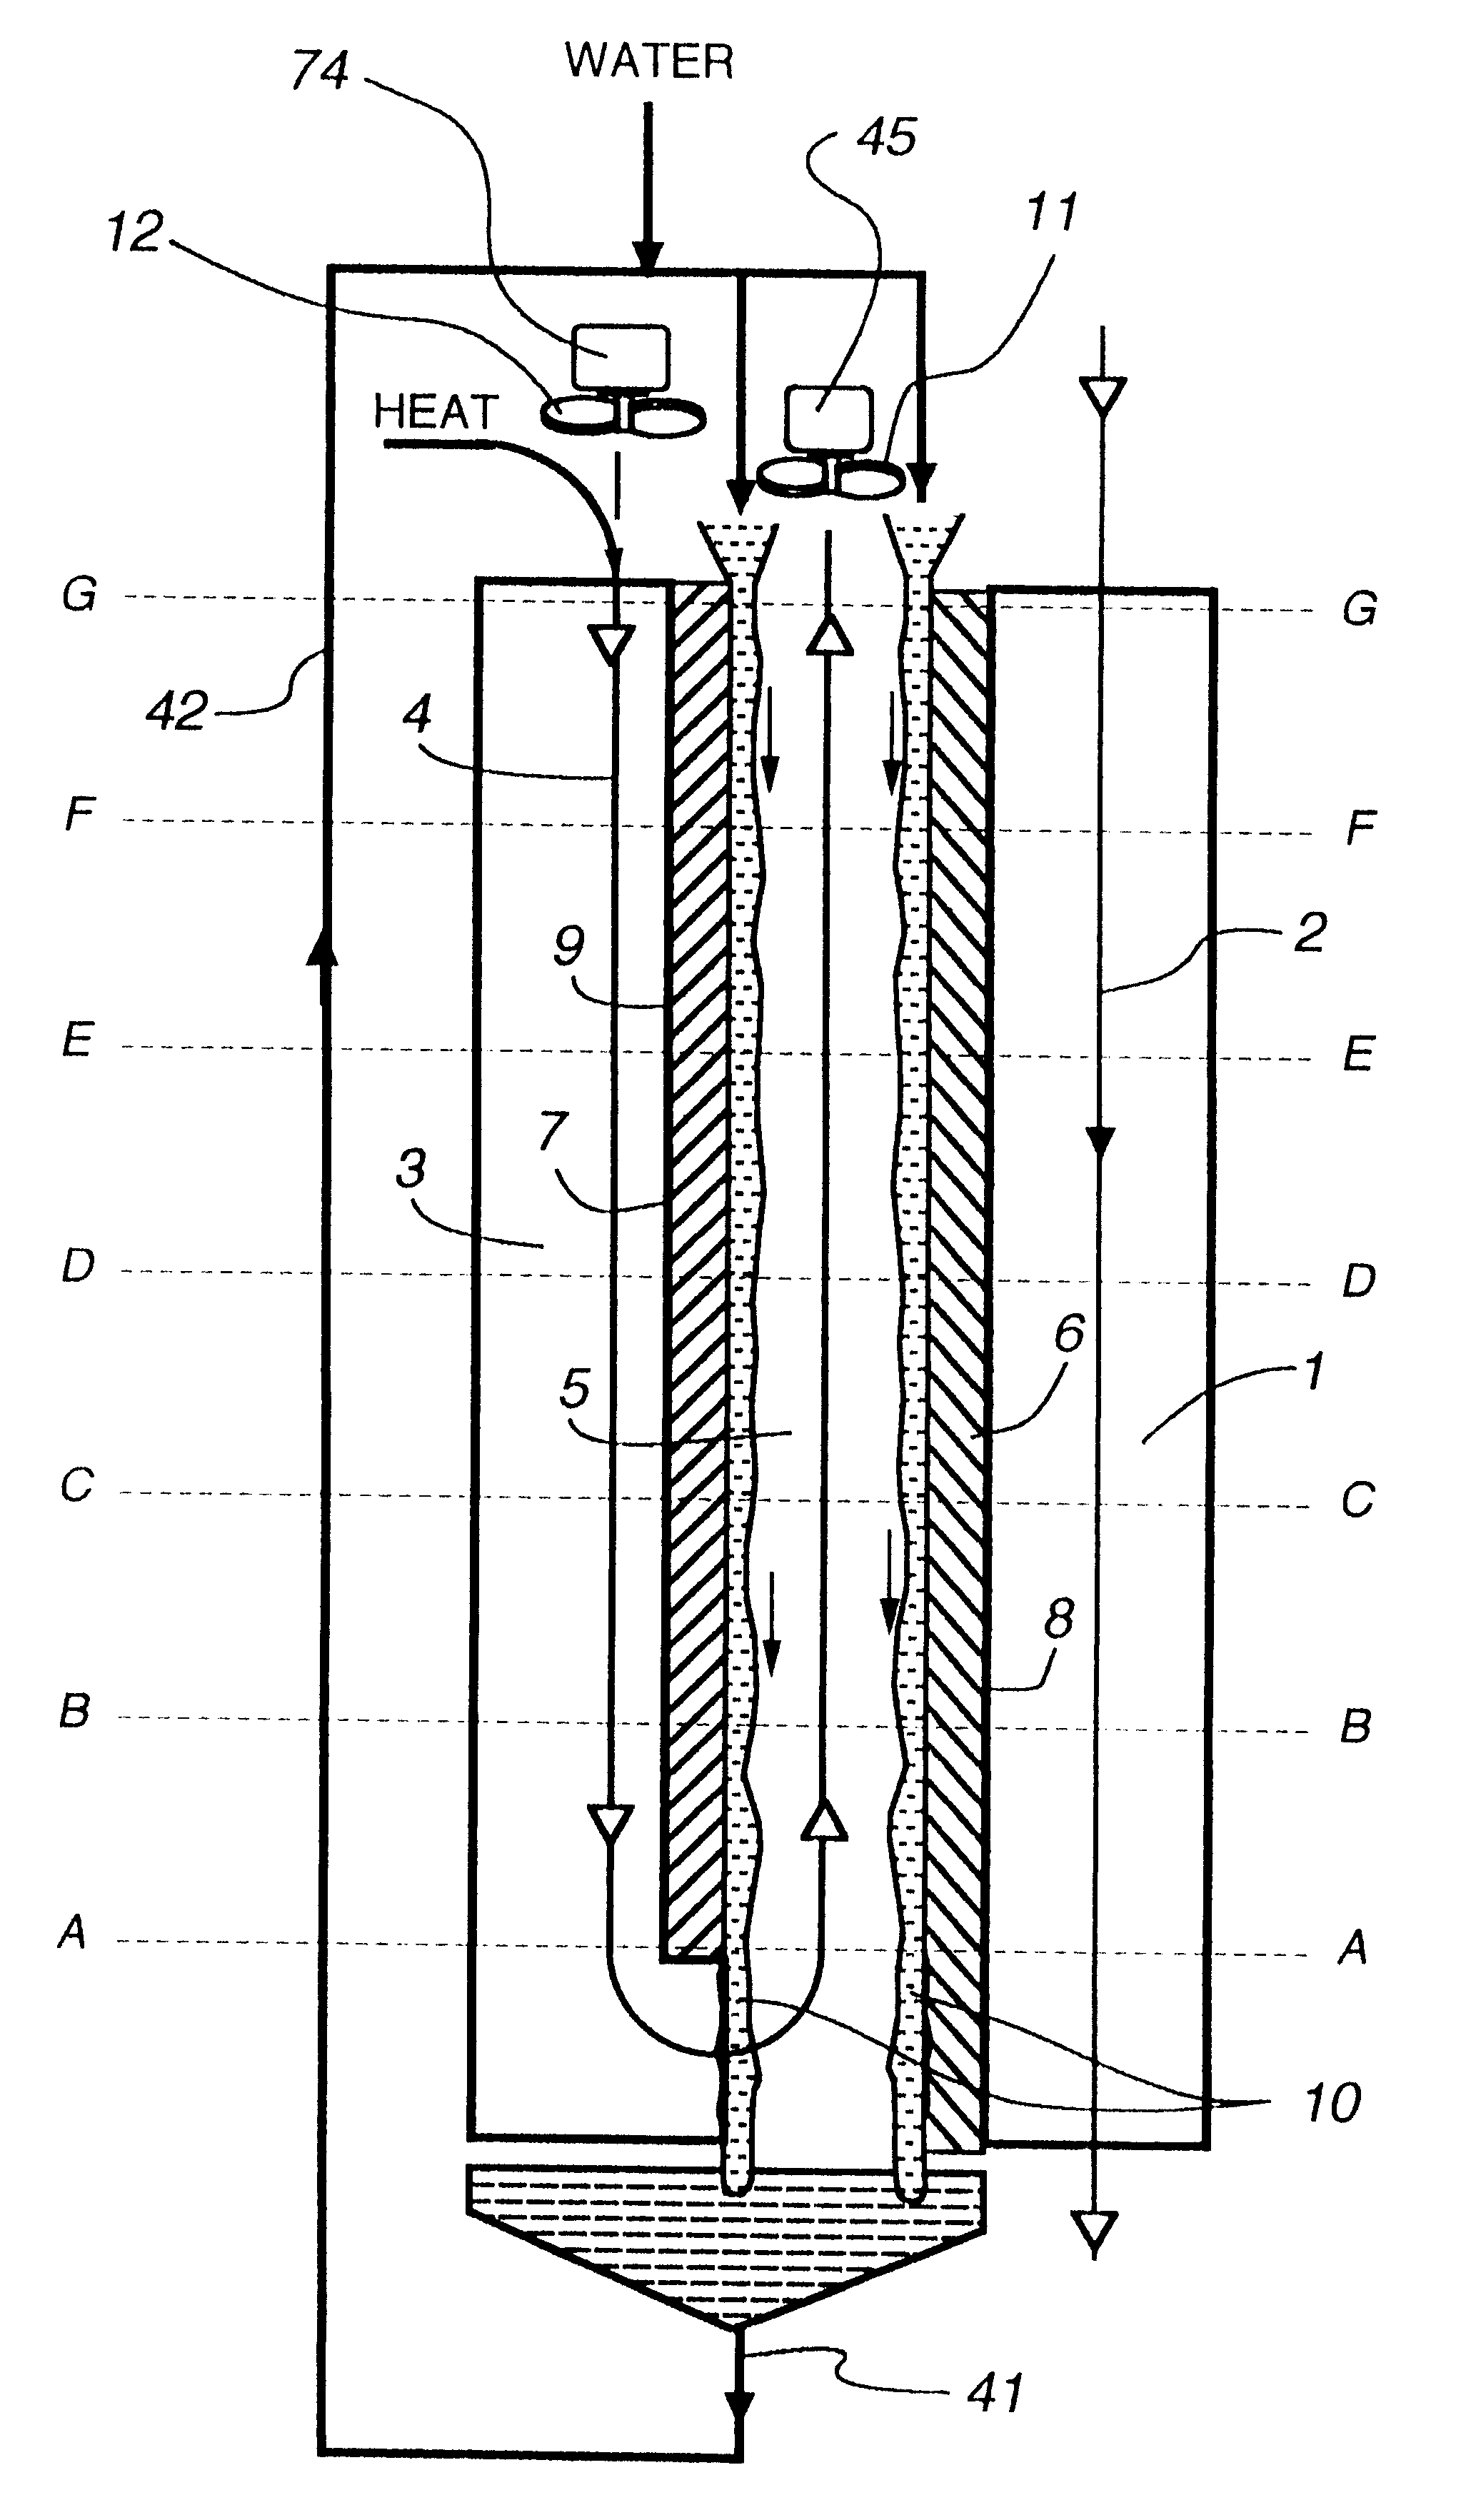 Method and apparatus of indirect-evaporation cooling